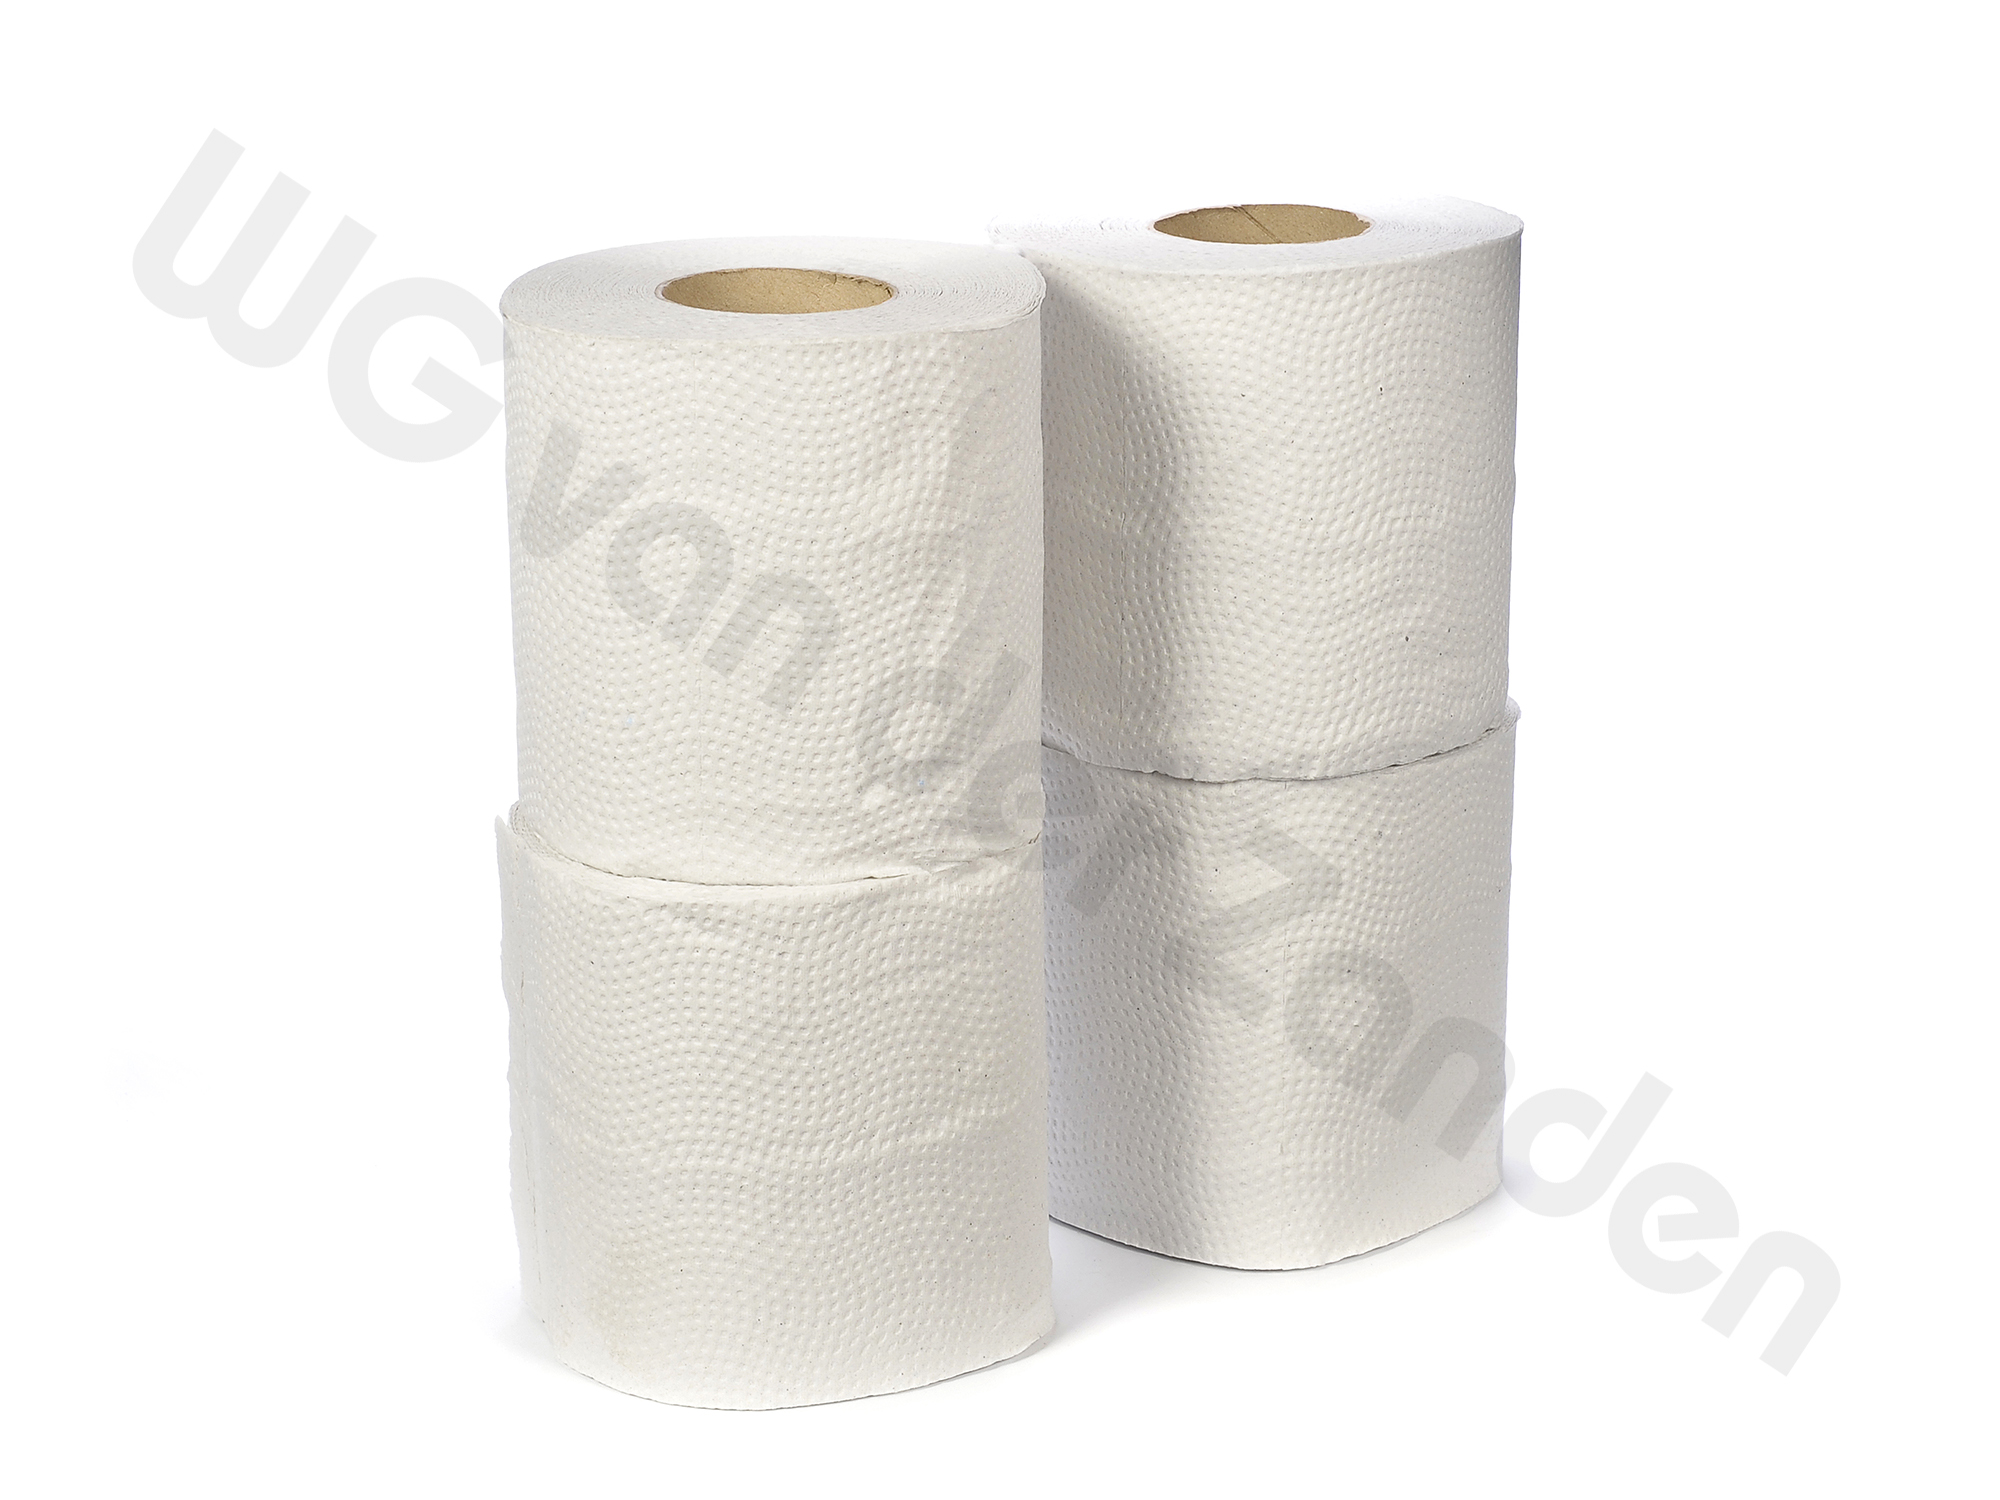 666600 TOILET PAPER TISSUE 2-PLY 200SHEET / ROLL